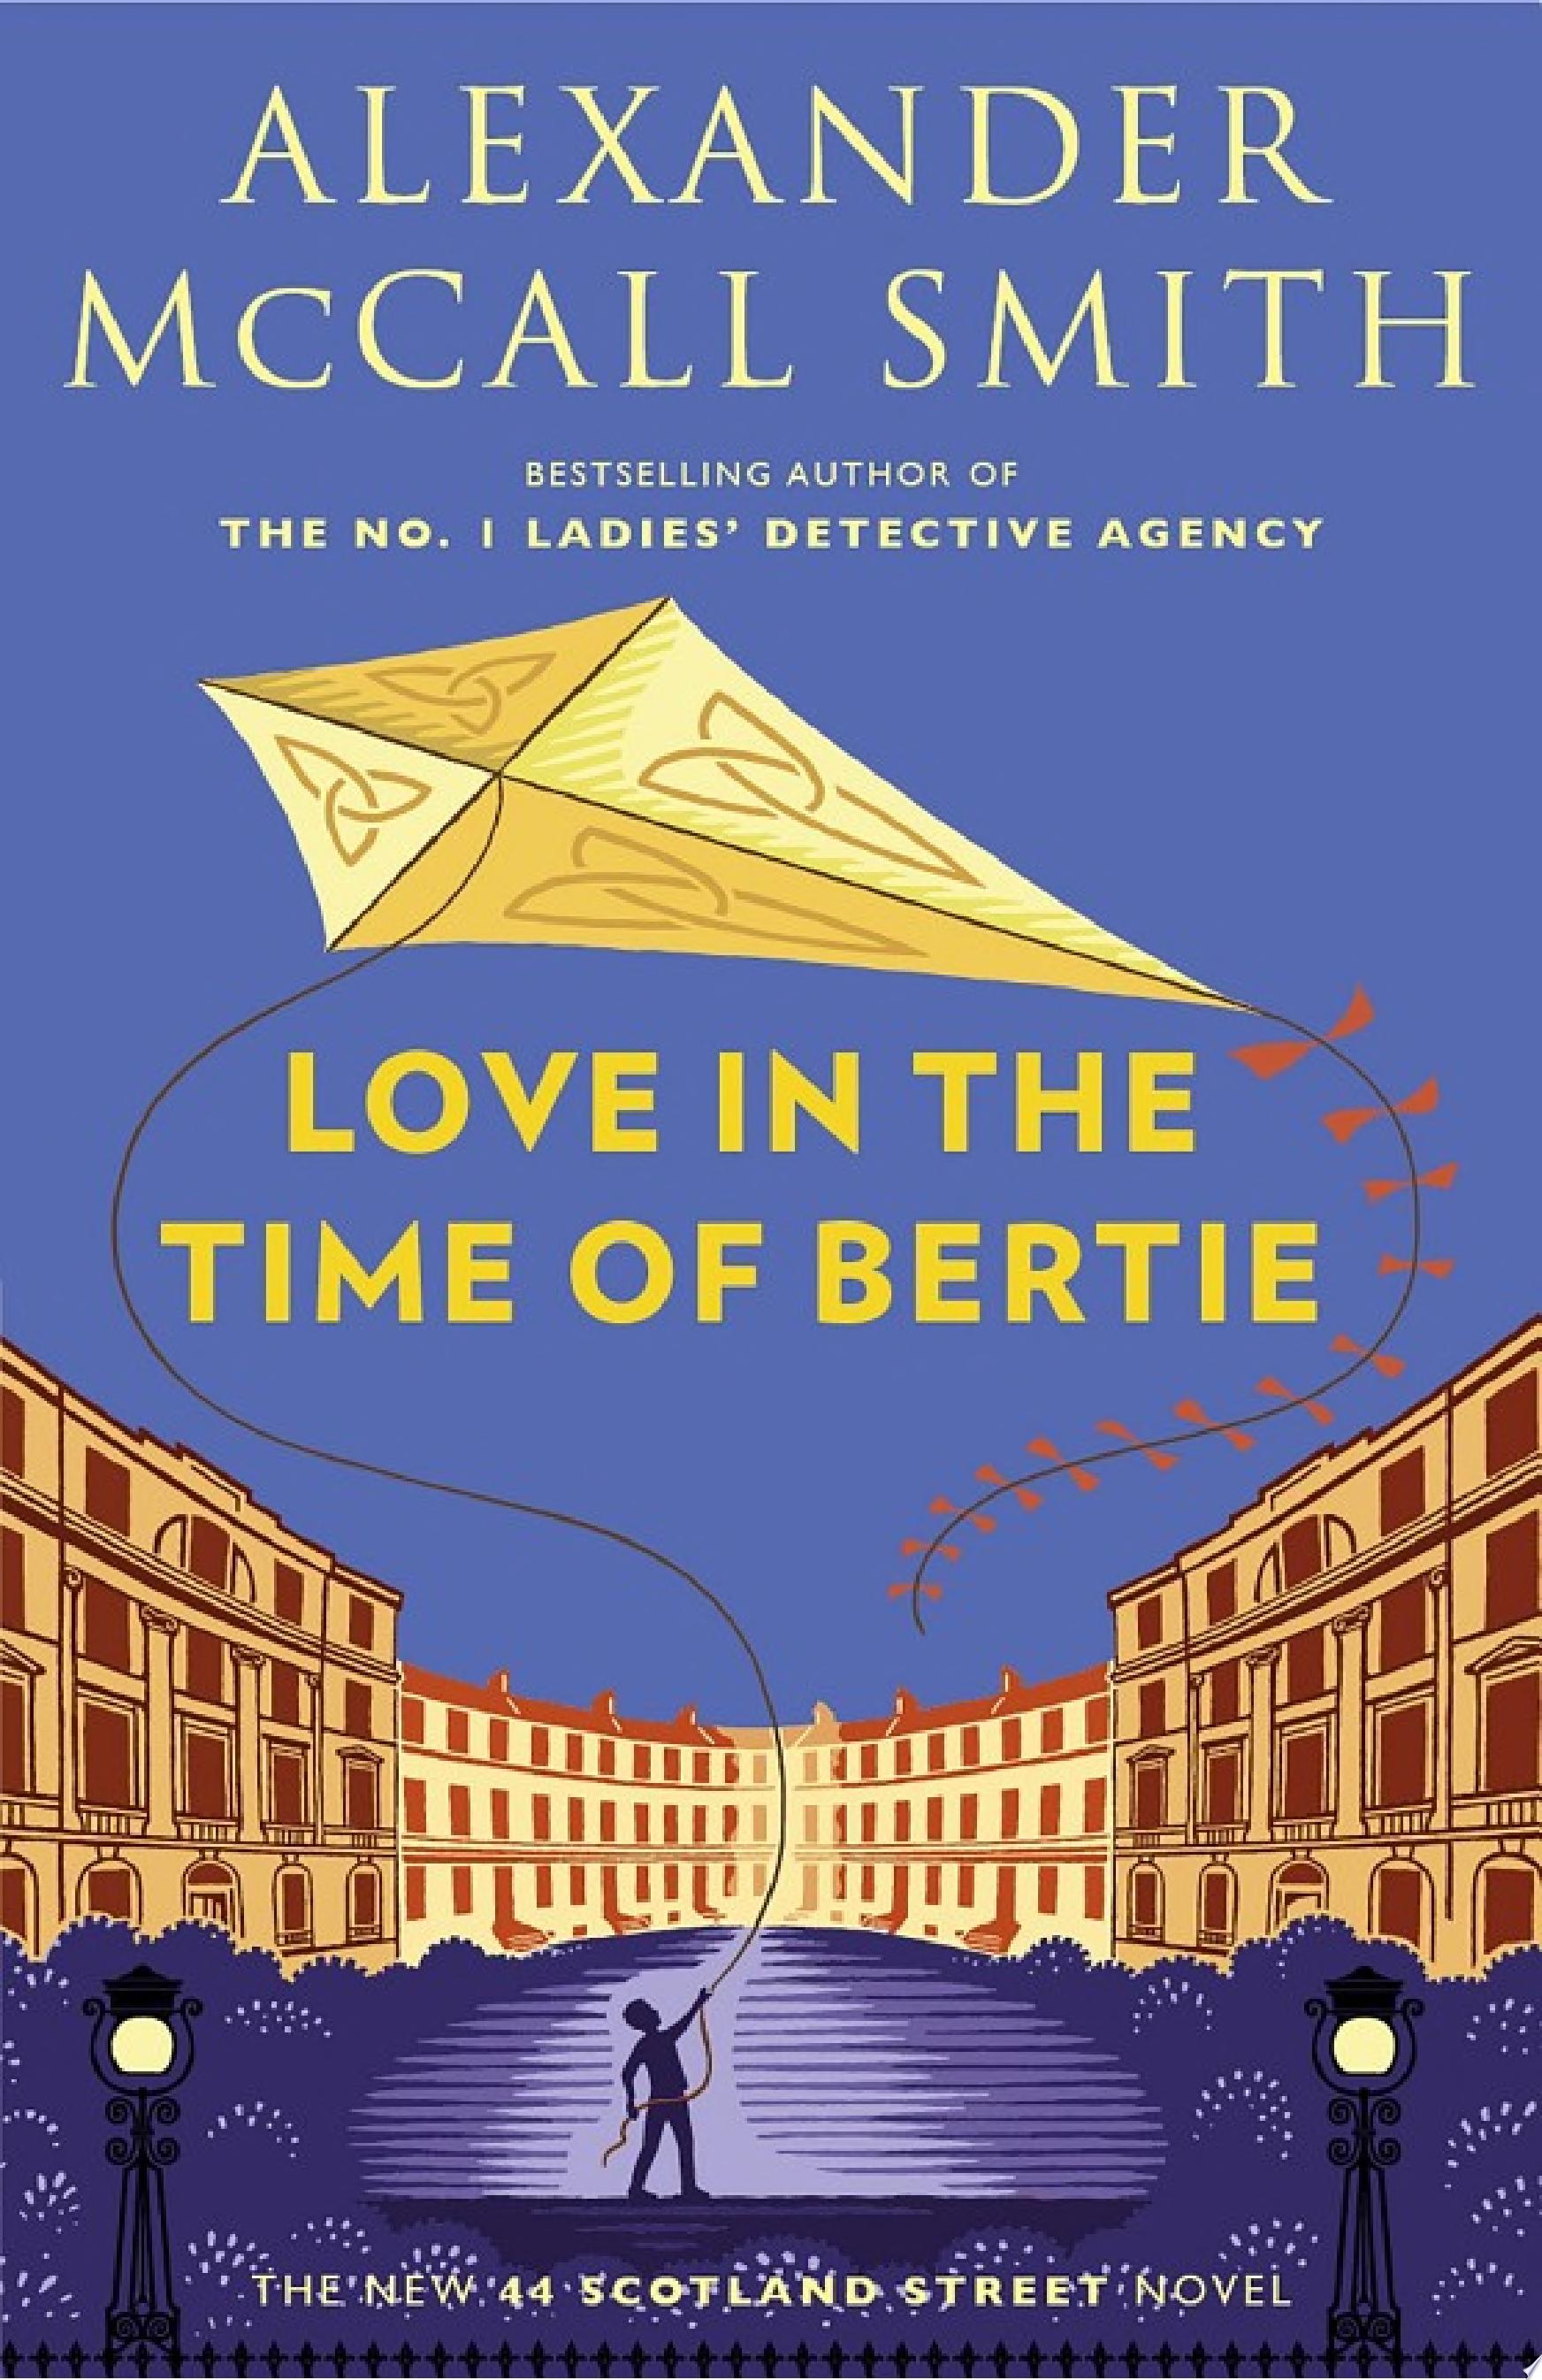 Image for "Love in the Time of Bertie"